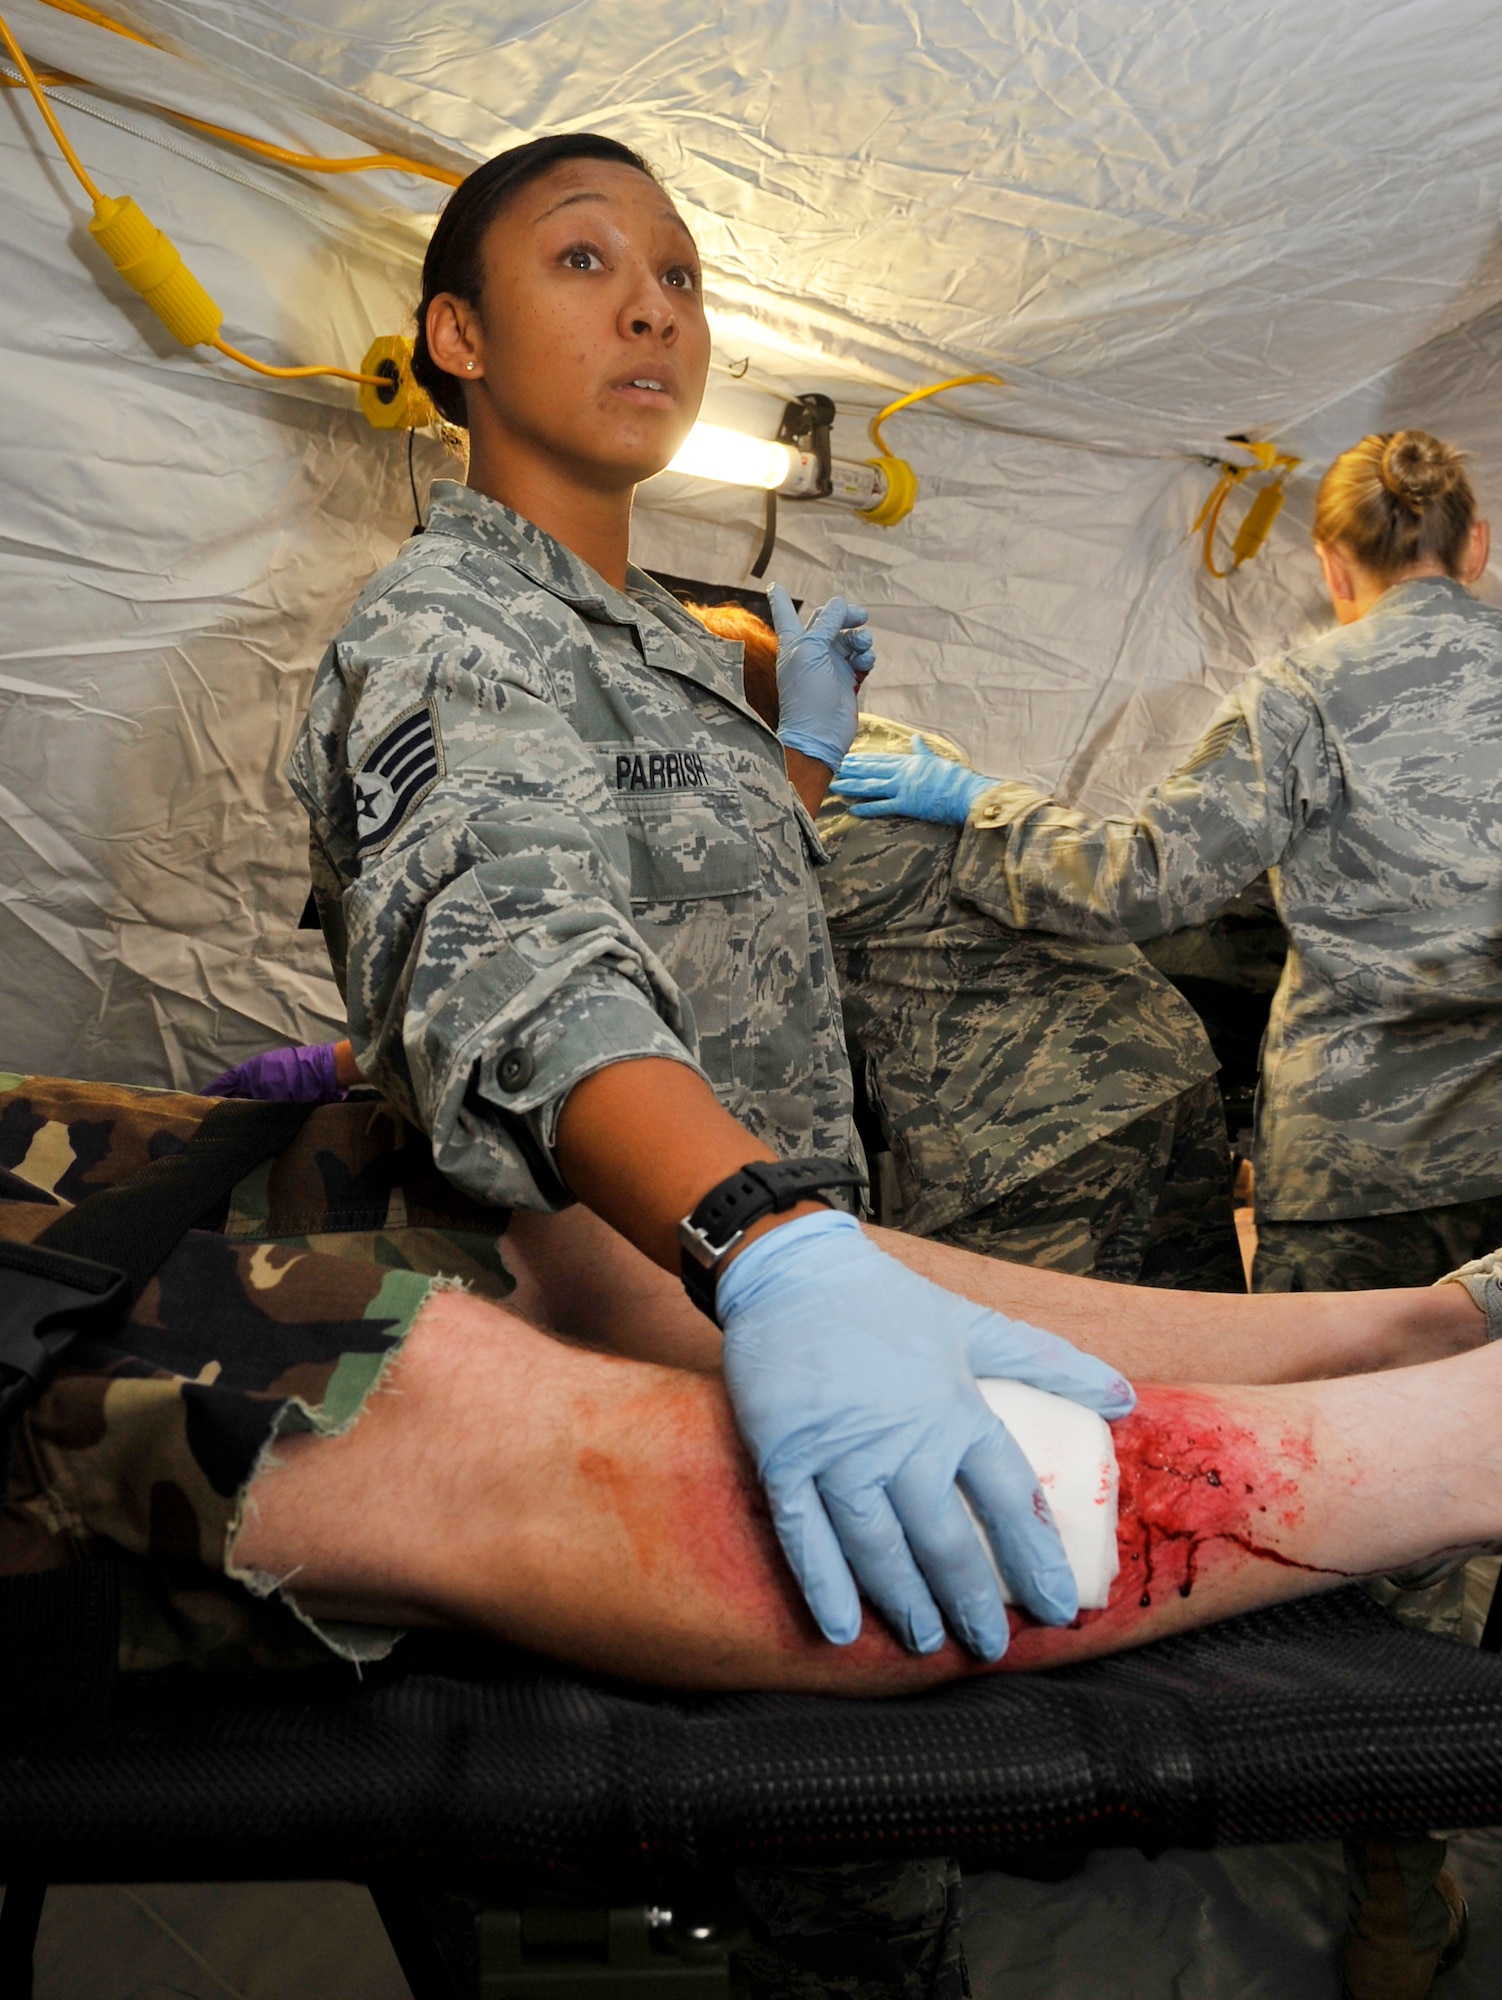 U.S. Air Forces in Europe and Air Forces Africa medical unit member patch-up the leg of a wounded patient during Expeditionary Medical Support training Aug. 28, 2013, Ramstein Air Base, Germany. EMEDS training is conducted to prepare Airmen for humanitarian missions. (U.S. Air Force photo/Airman Dymekre Allen) 